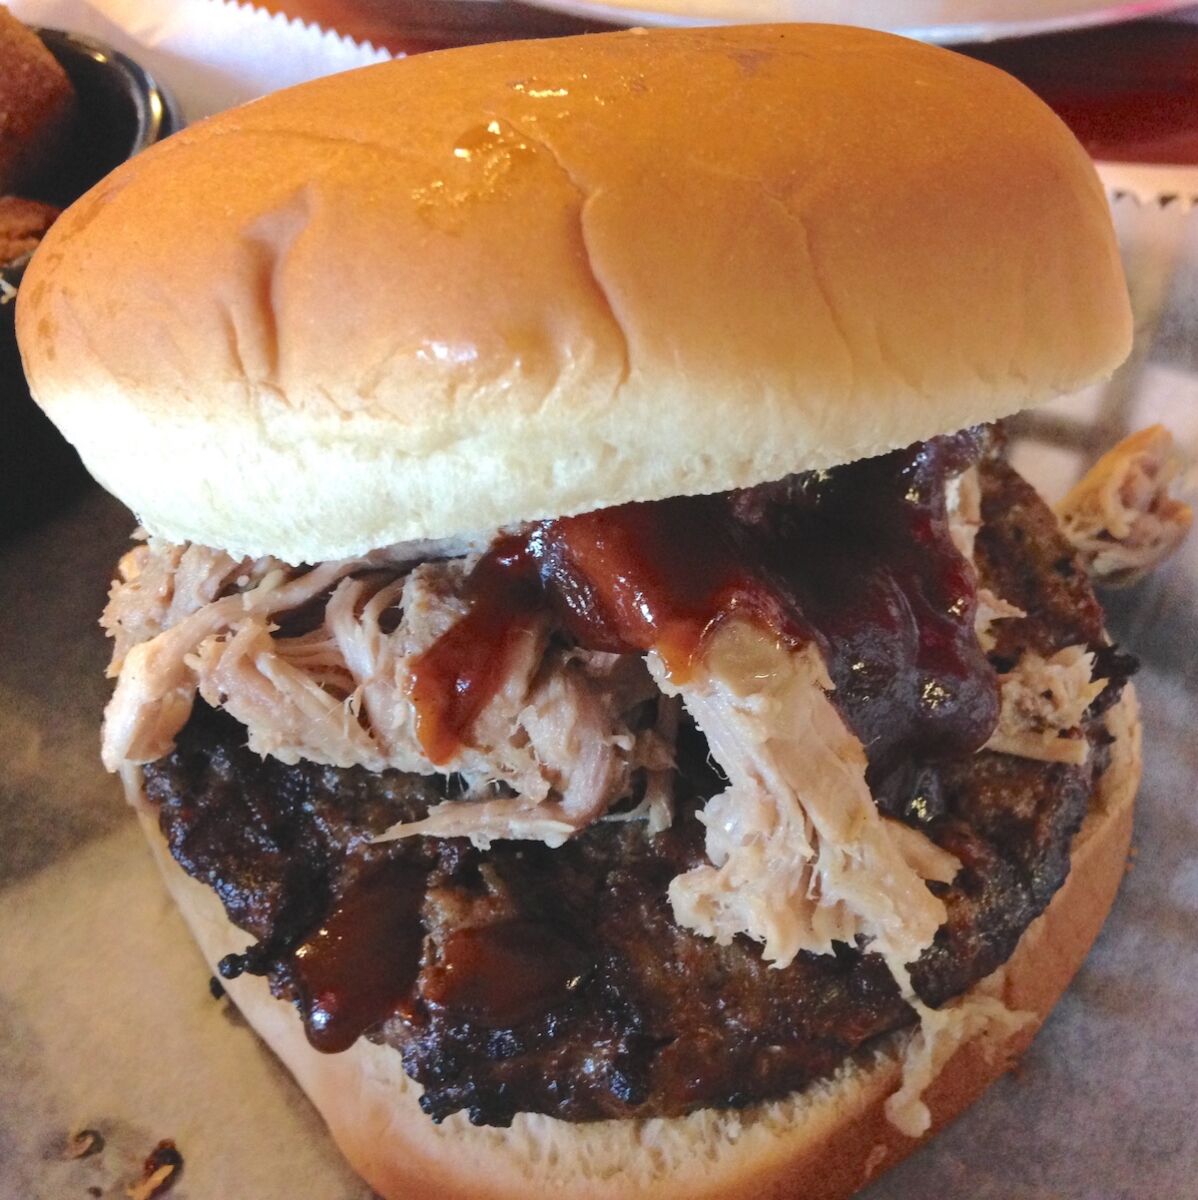 Pulled Pork Burger from Shiver's BBQ in Homestead, Florida